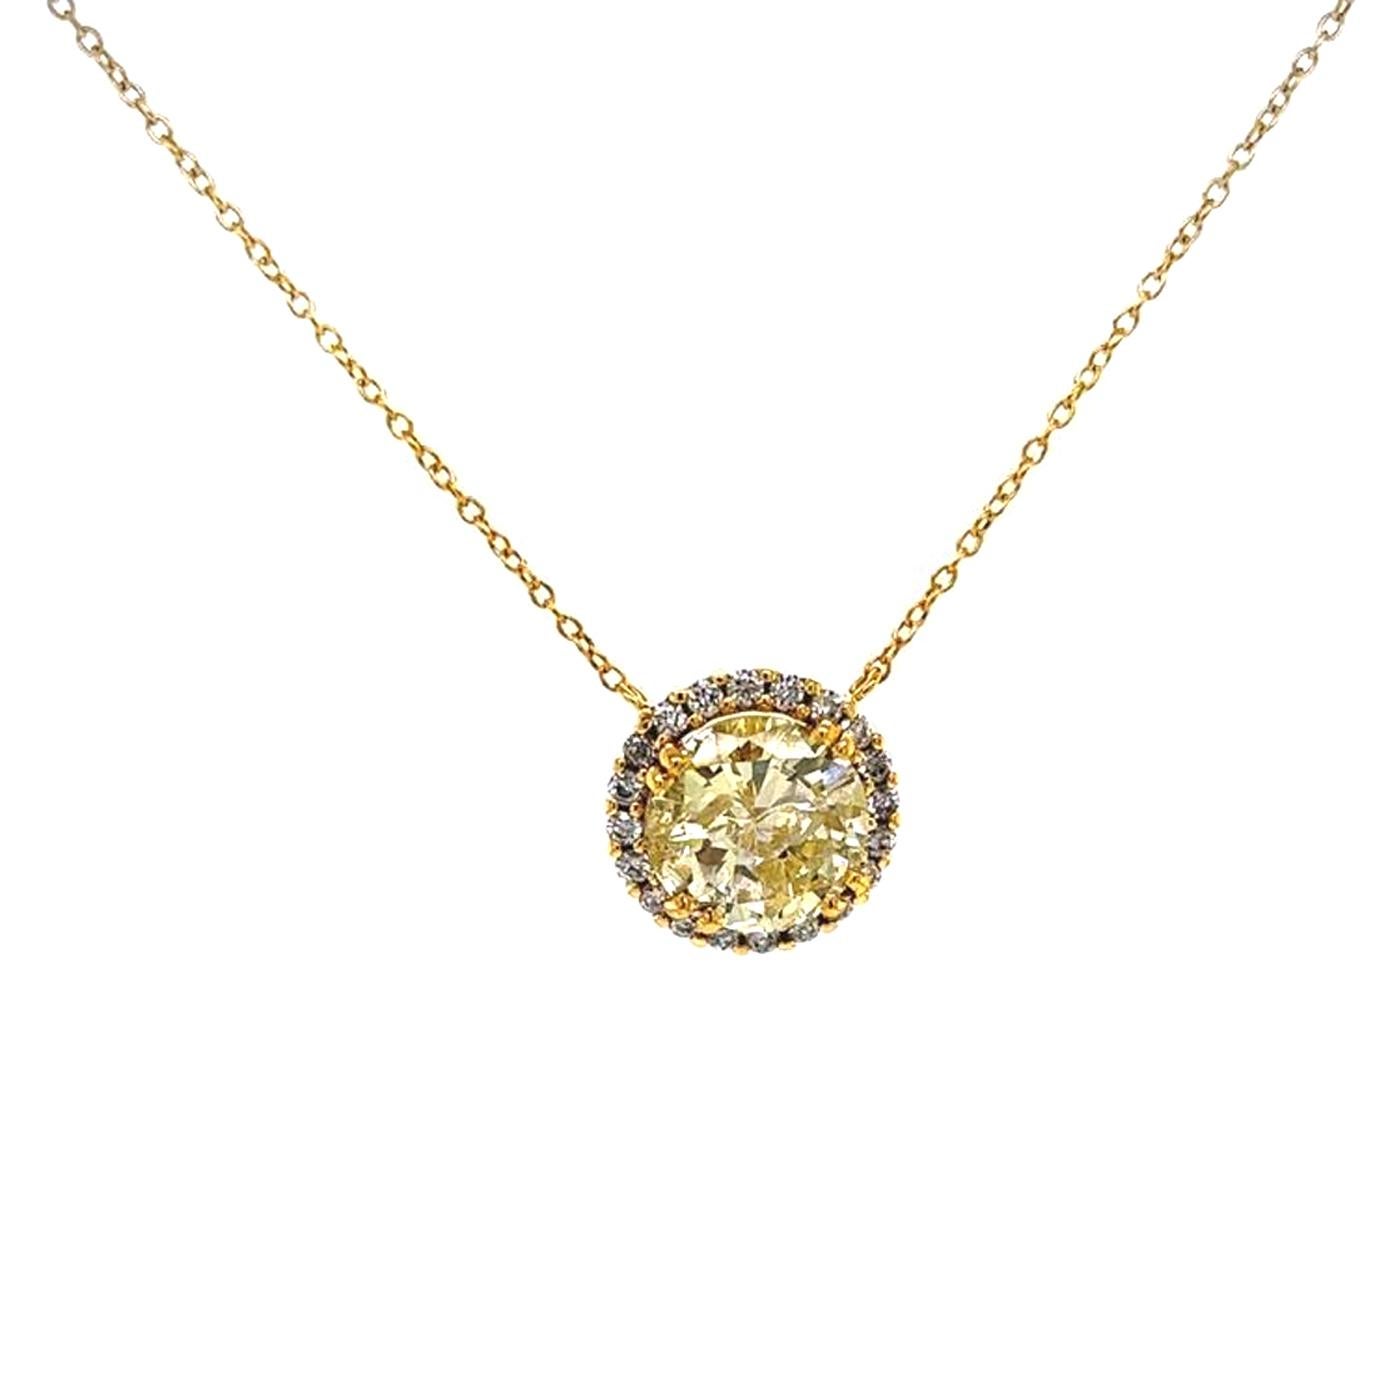 Round Cut 3.15 Carat Natural Fancy Yellow Round Diamond 18K Gold Pendant Halo Necklace For Sale